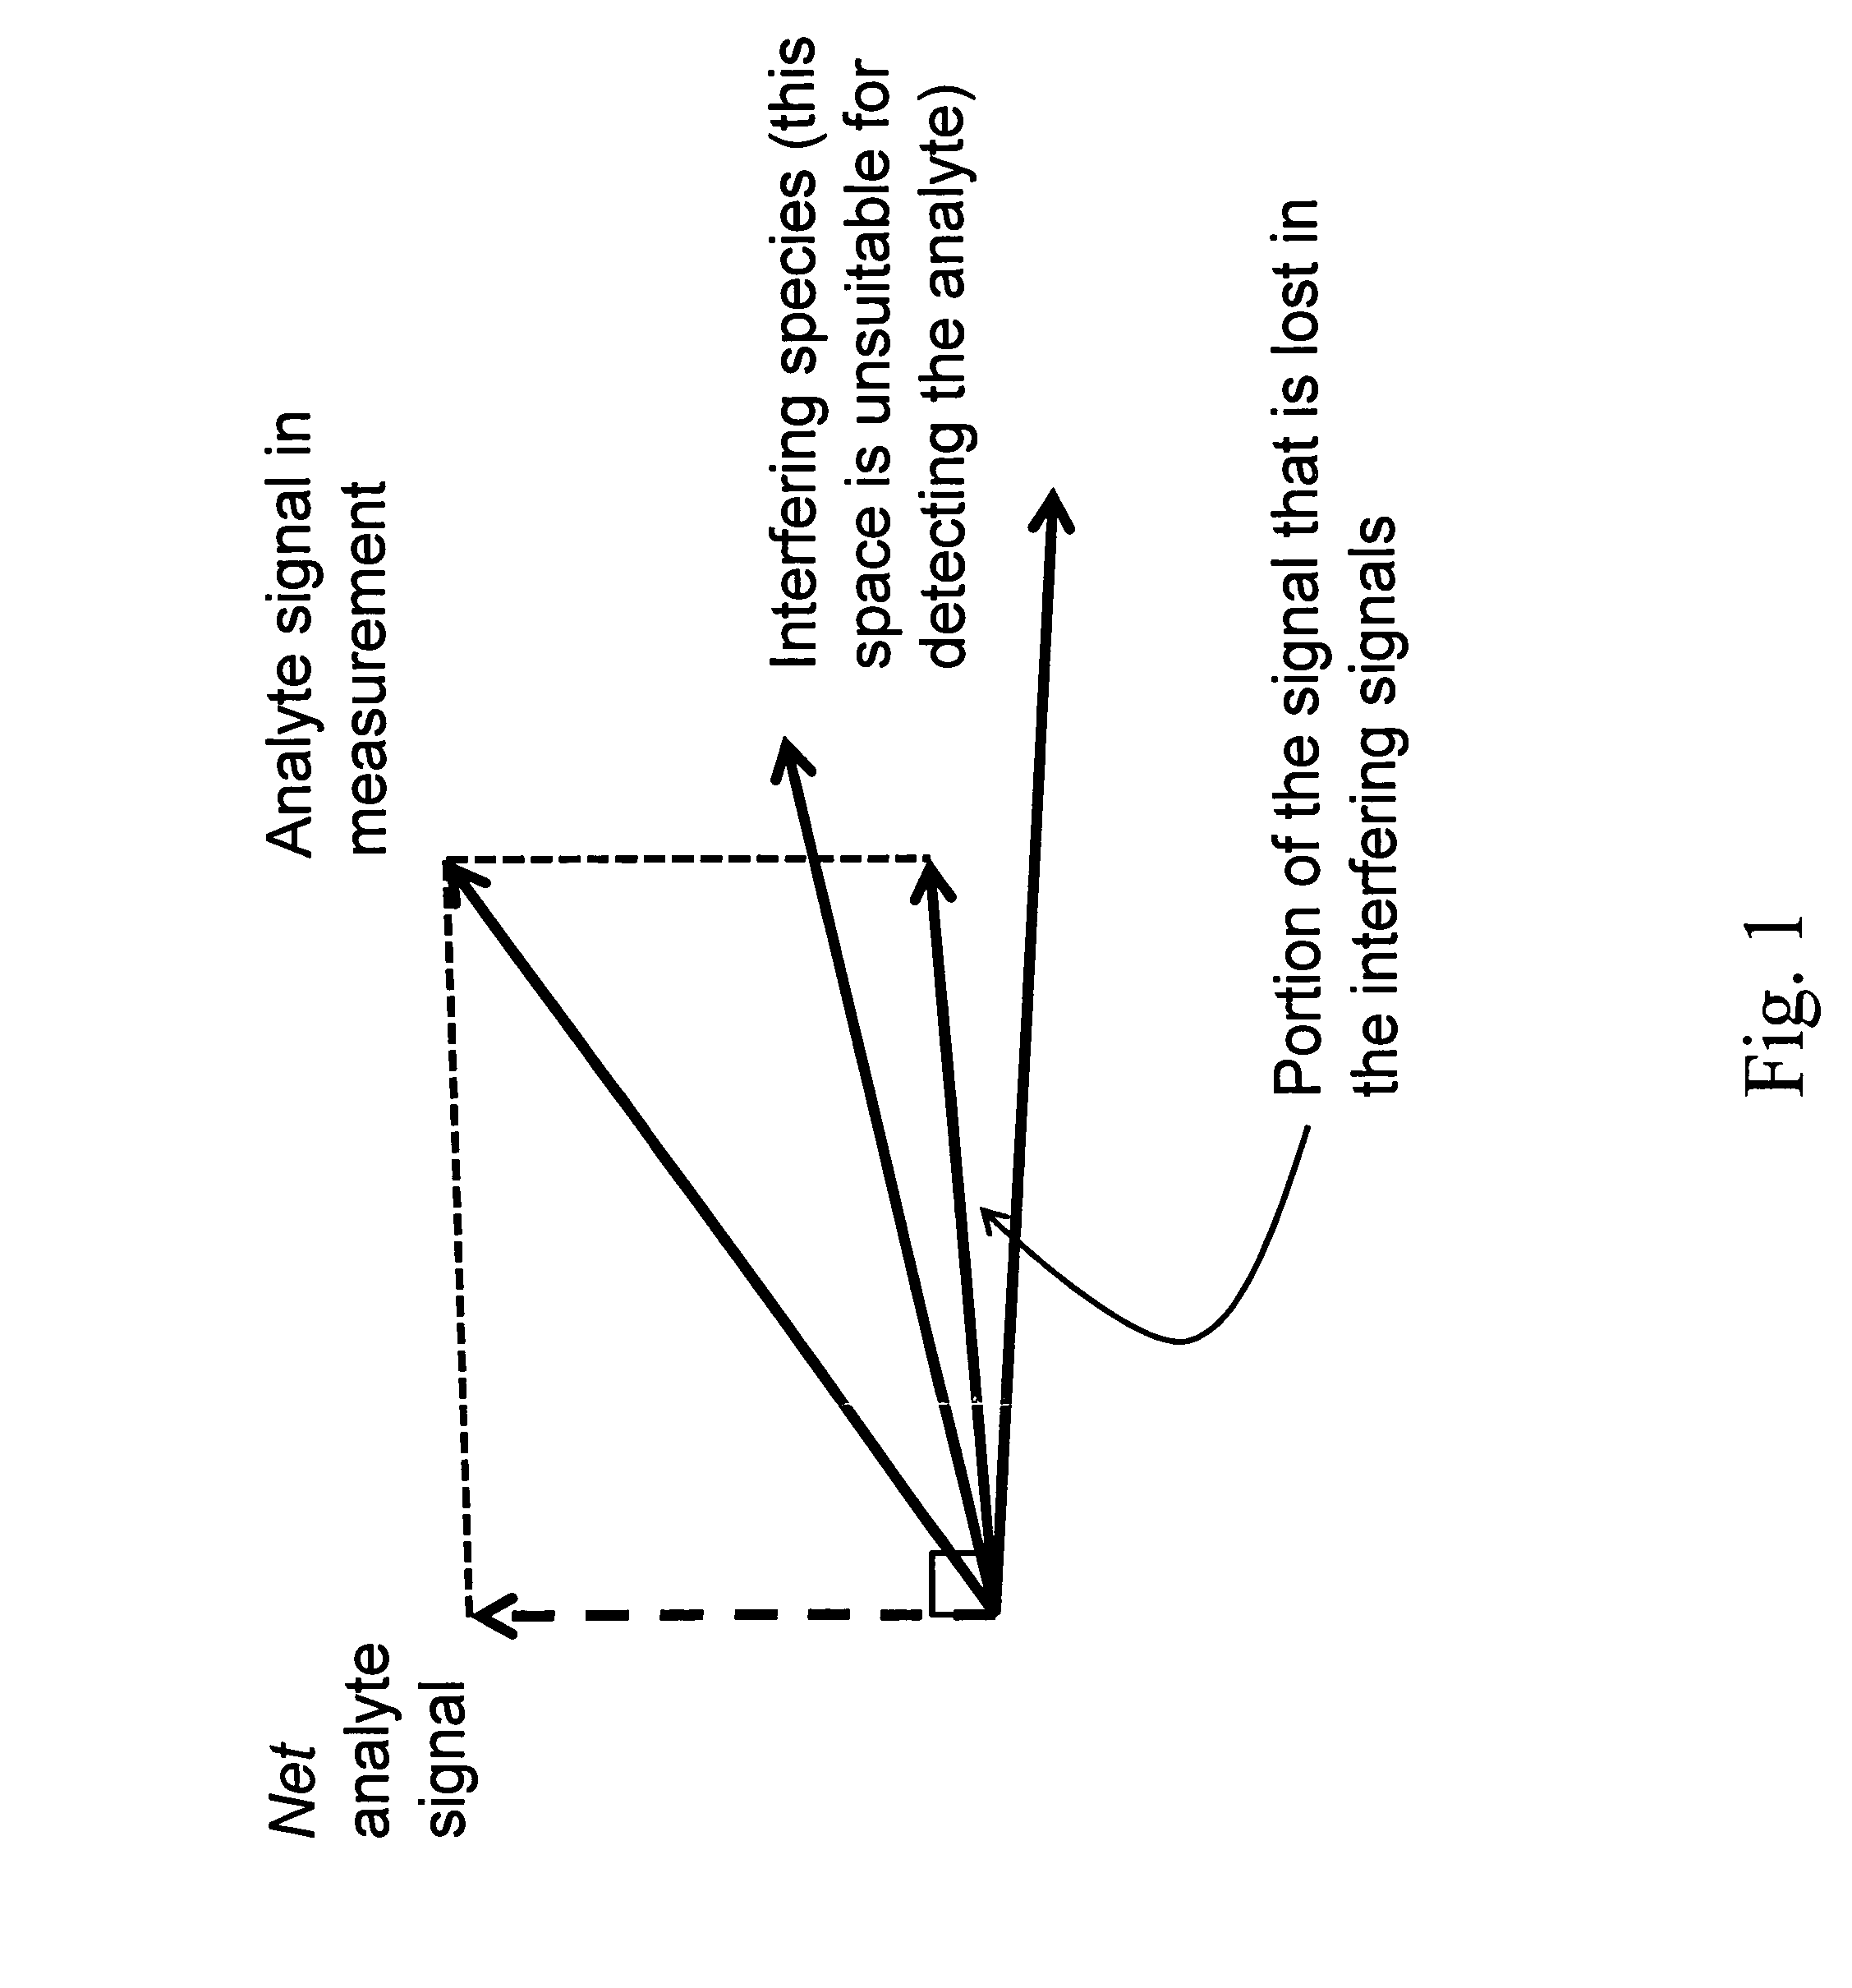 Methods for noninvasive determination of in vivo alcohol concentration using Raman spectroscopy